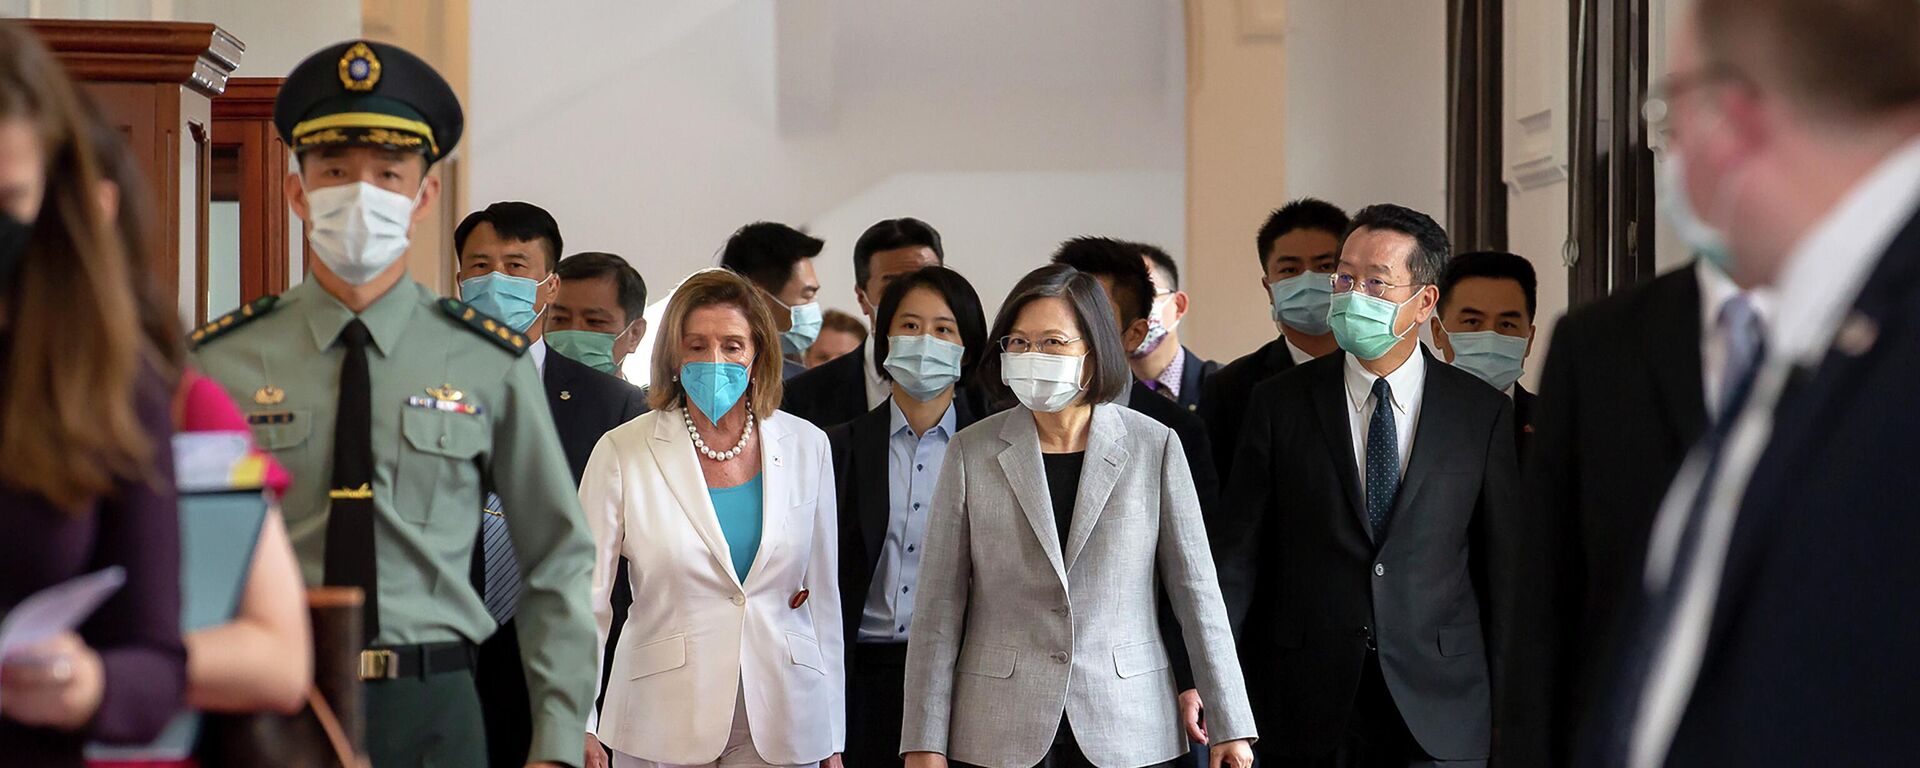 In this photo released by the Taiwan Presidential Office, U.S. House Speaker Nancy Pelosi, center left, and Taiwanese President President Tsai Ing-wen arrive for a meeting in Taipei, Taiwan, Wednesday, Aug. 3, 2022 - Sputnik International, 1920, 17.08.2022